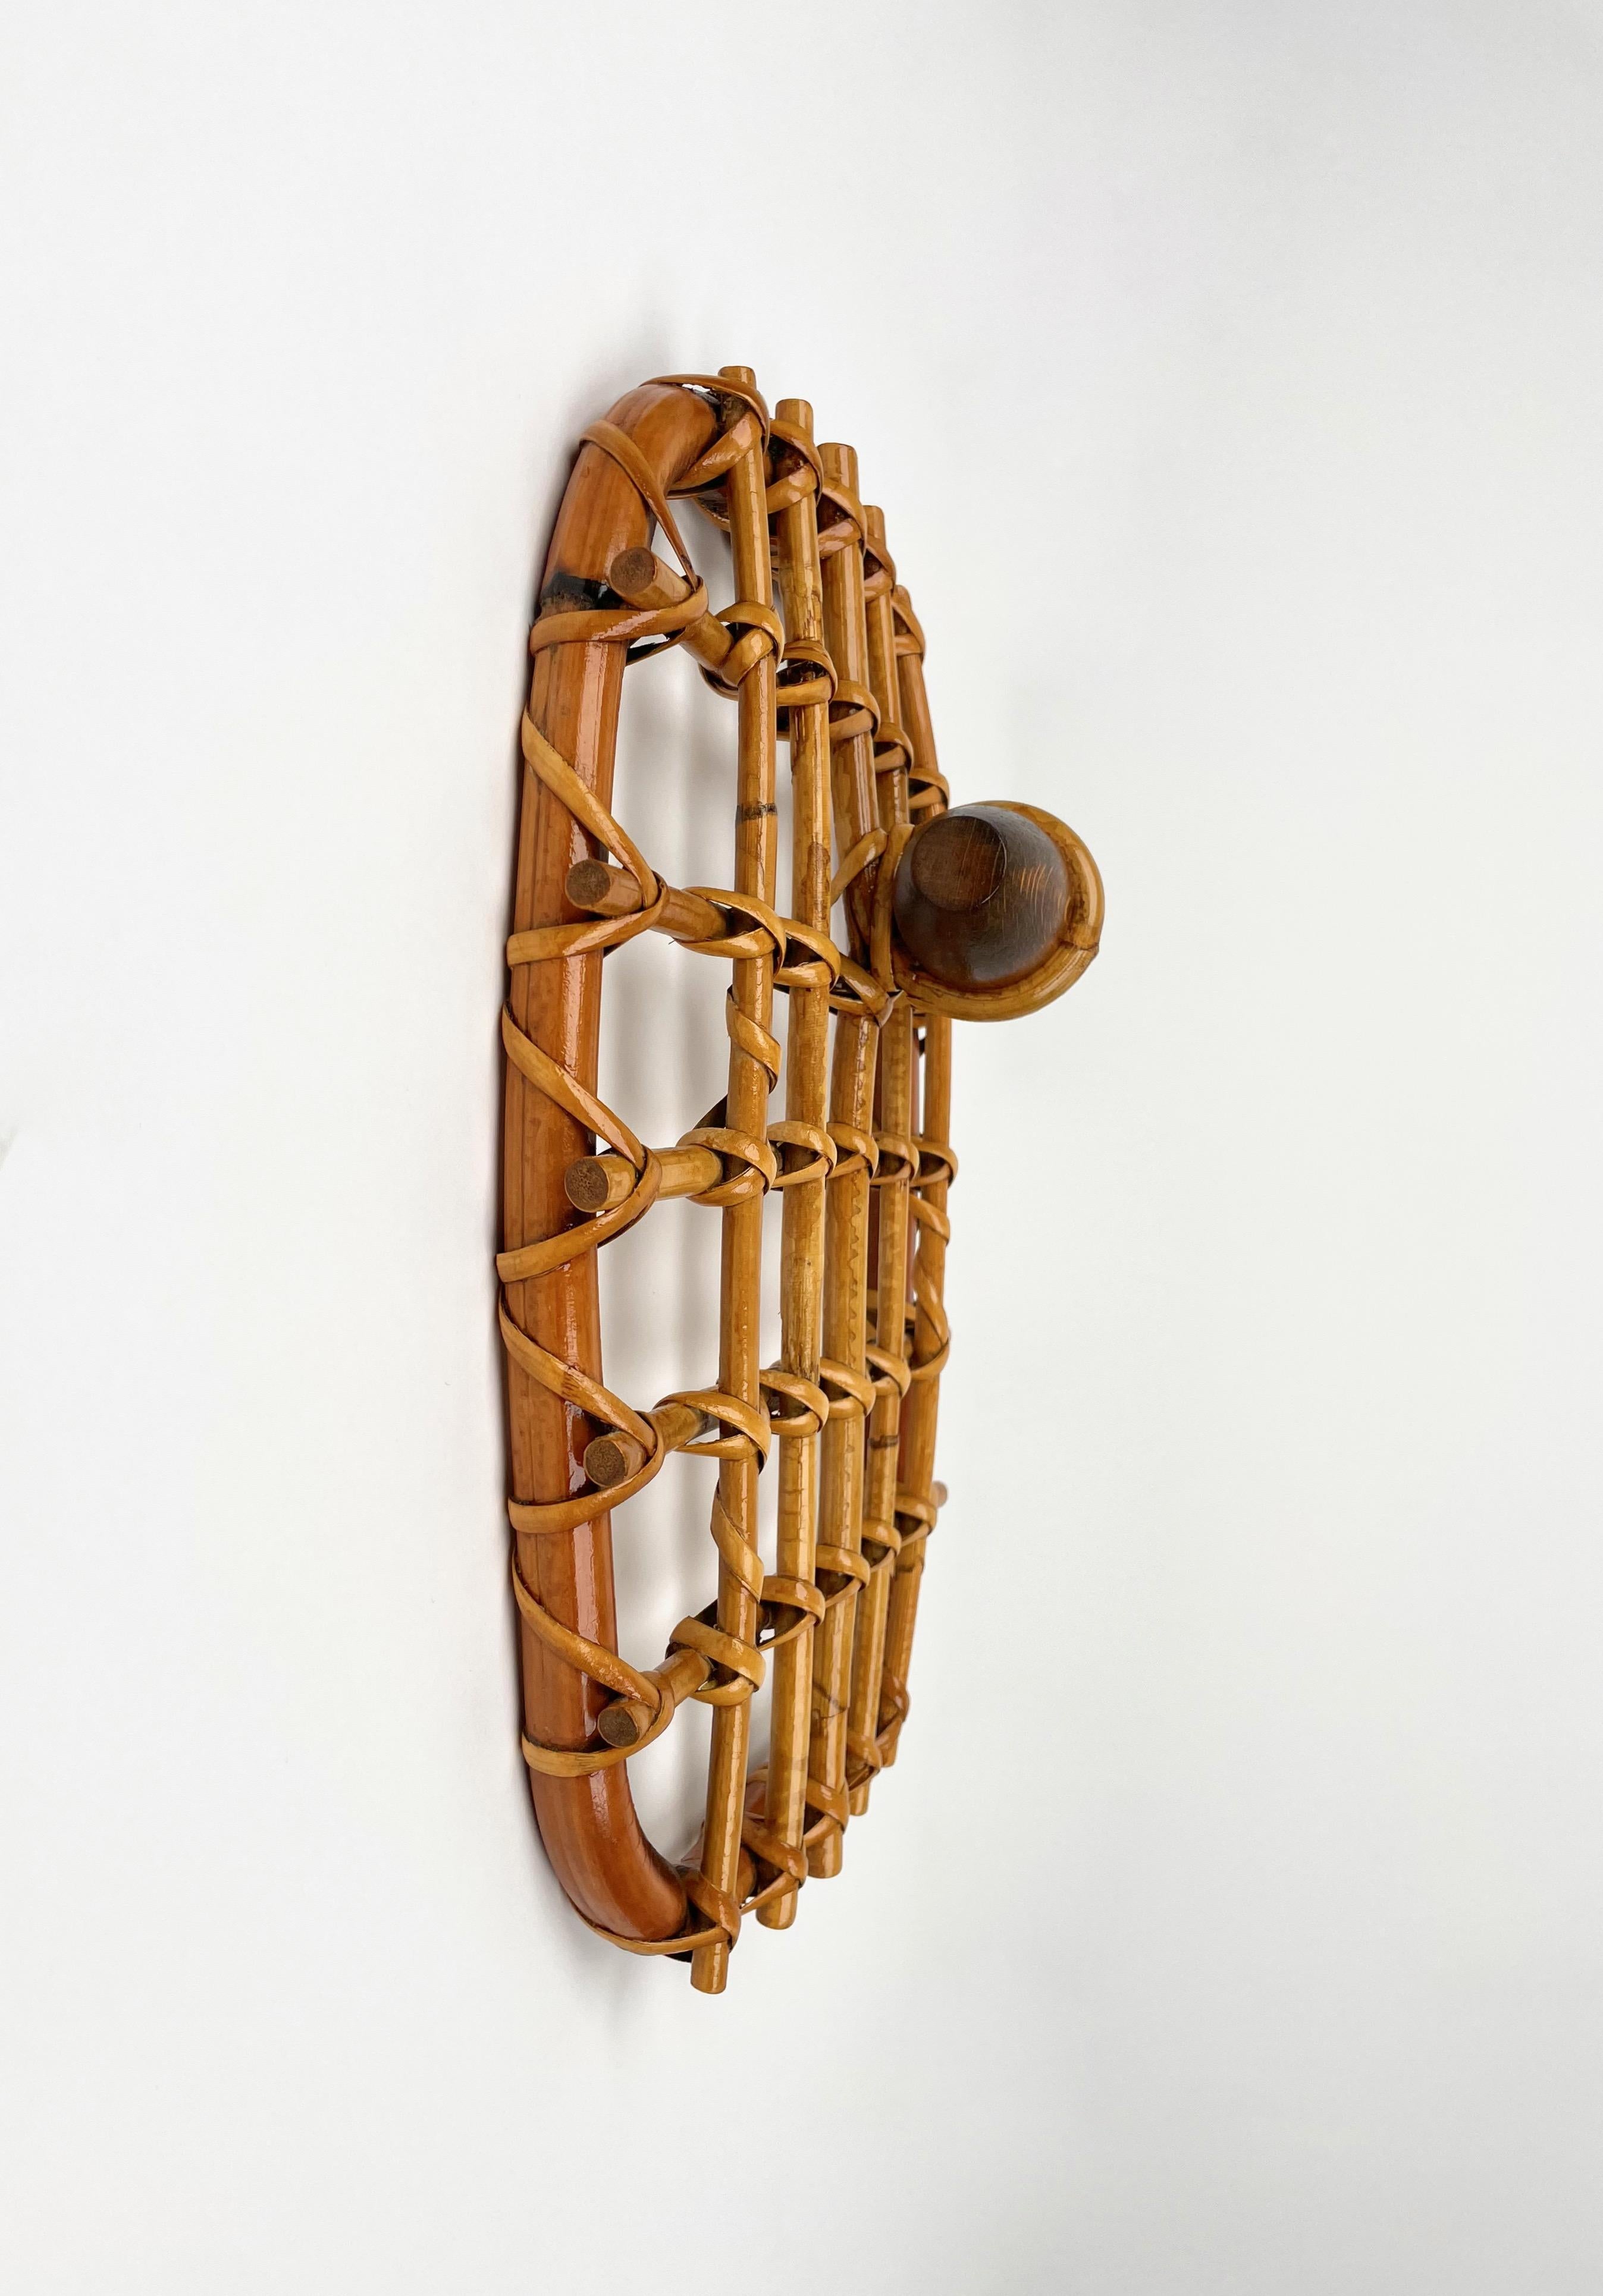 Bamboo & Rattan Coat Rack Stand by Olaf von Bohr, Italy 1950s For Sale 2